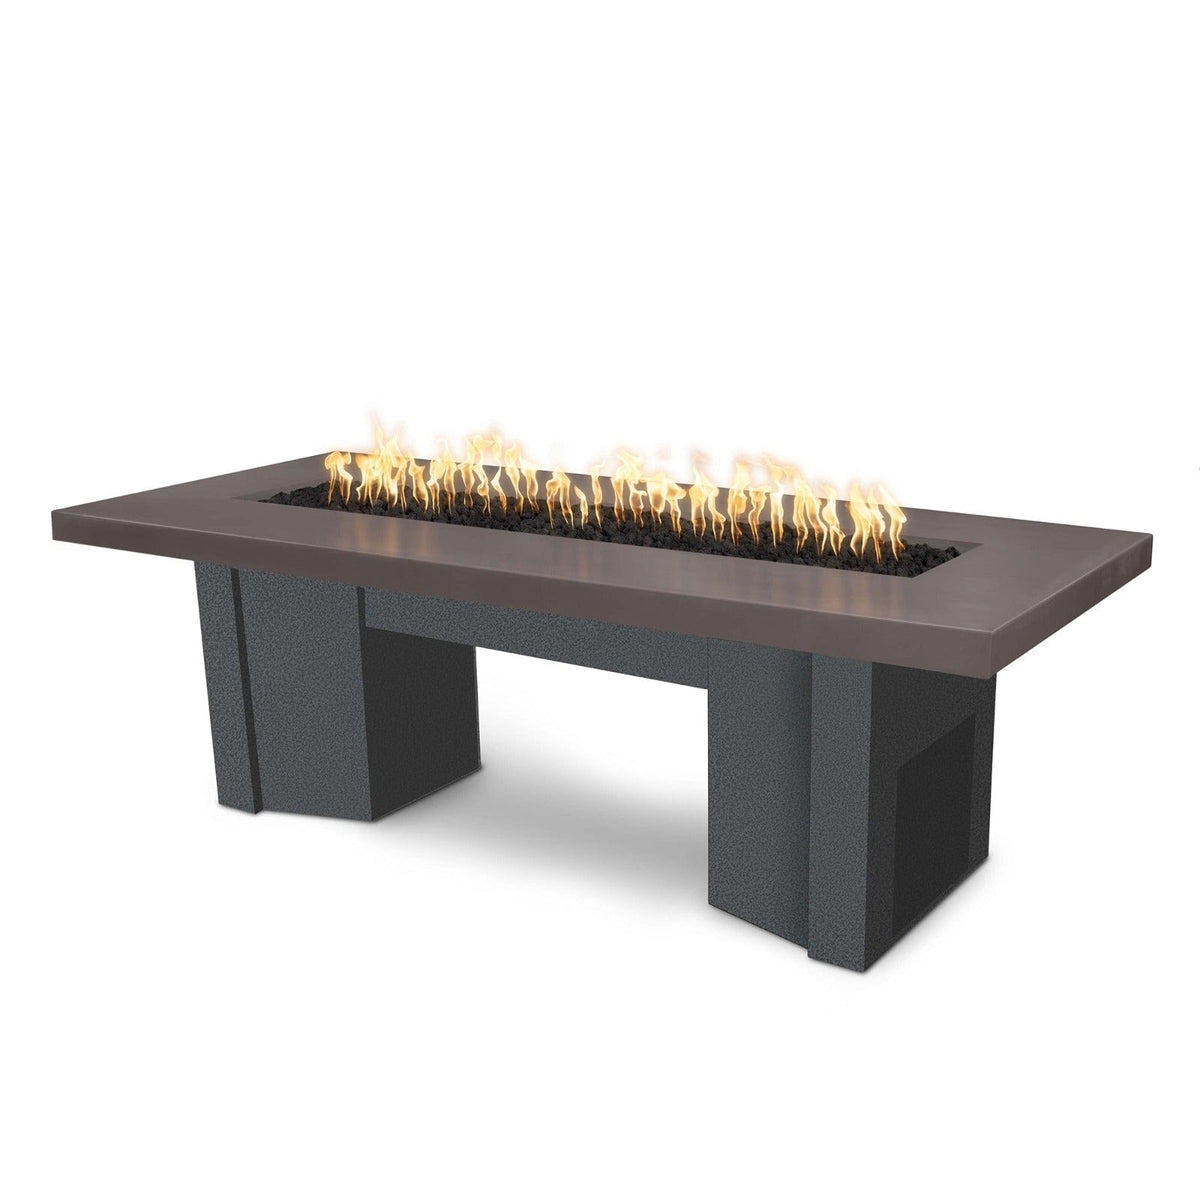 The Outdoor Plus Fire Features Chestnut (-CST) / Silver Vein Powder Coated Steel (-SLV) The Outdoor Plus 78&quot; Alameda Fire Table Smooth Concrete in Liquid Propane - 110V Plug &amp; Play Electronic Ignition / OPT-ALMGFRC78EKIT-LP